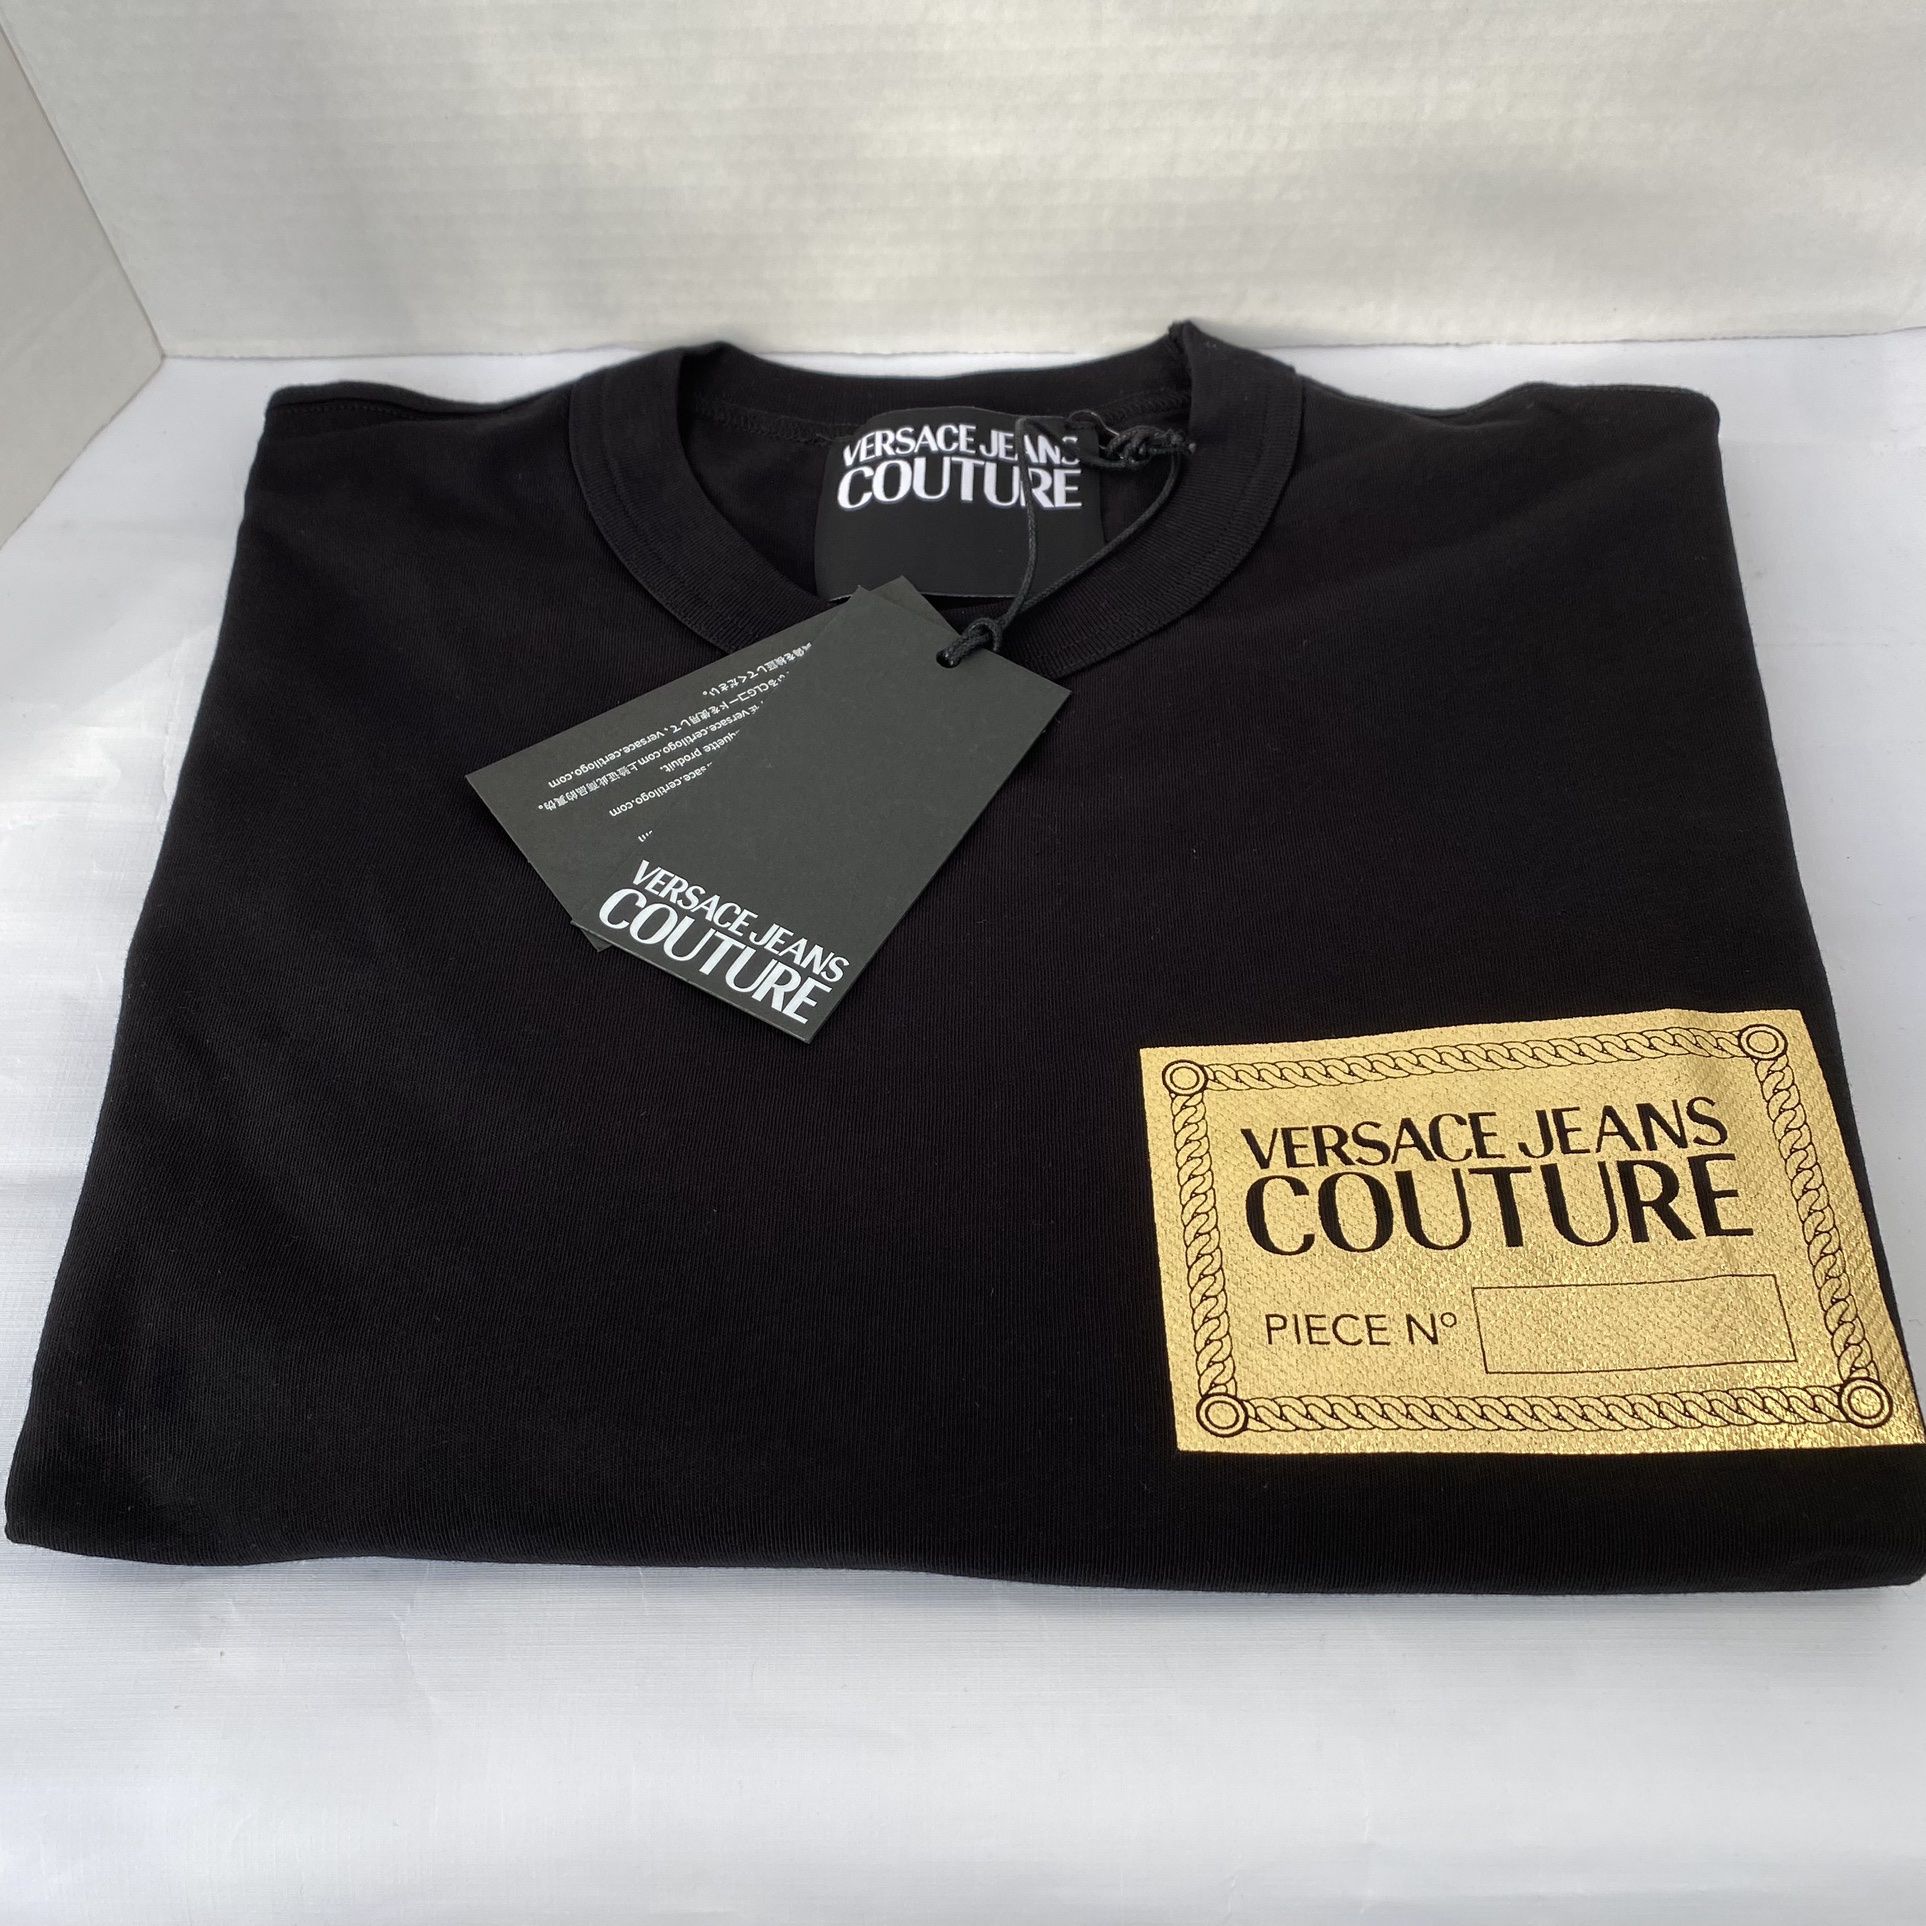 JEANS COUTURE T-SHIRT, NEW for Sale in Yonkers, NY OfferUp